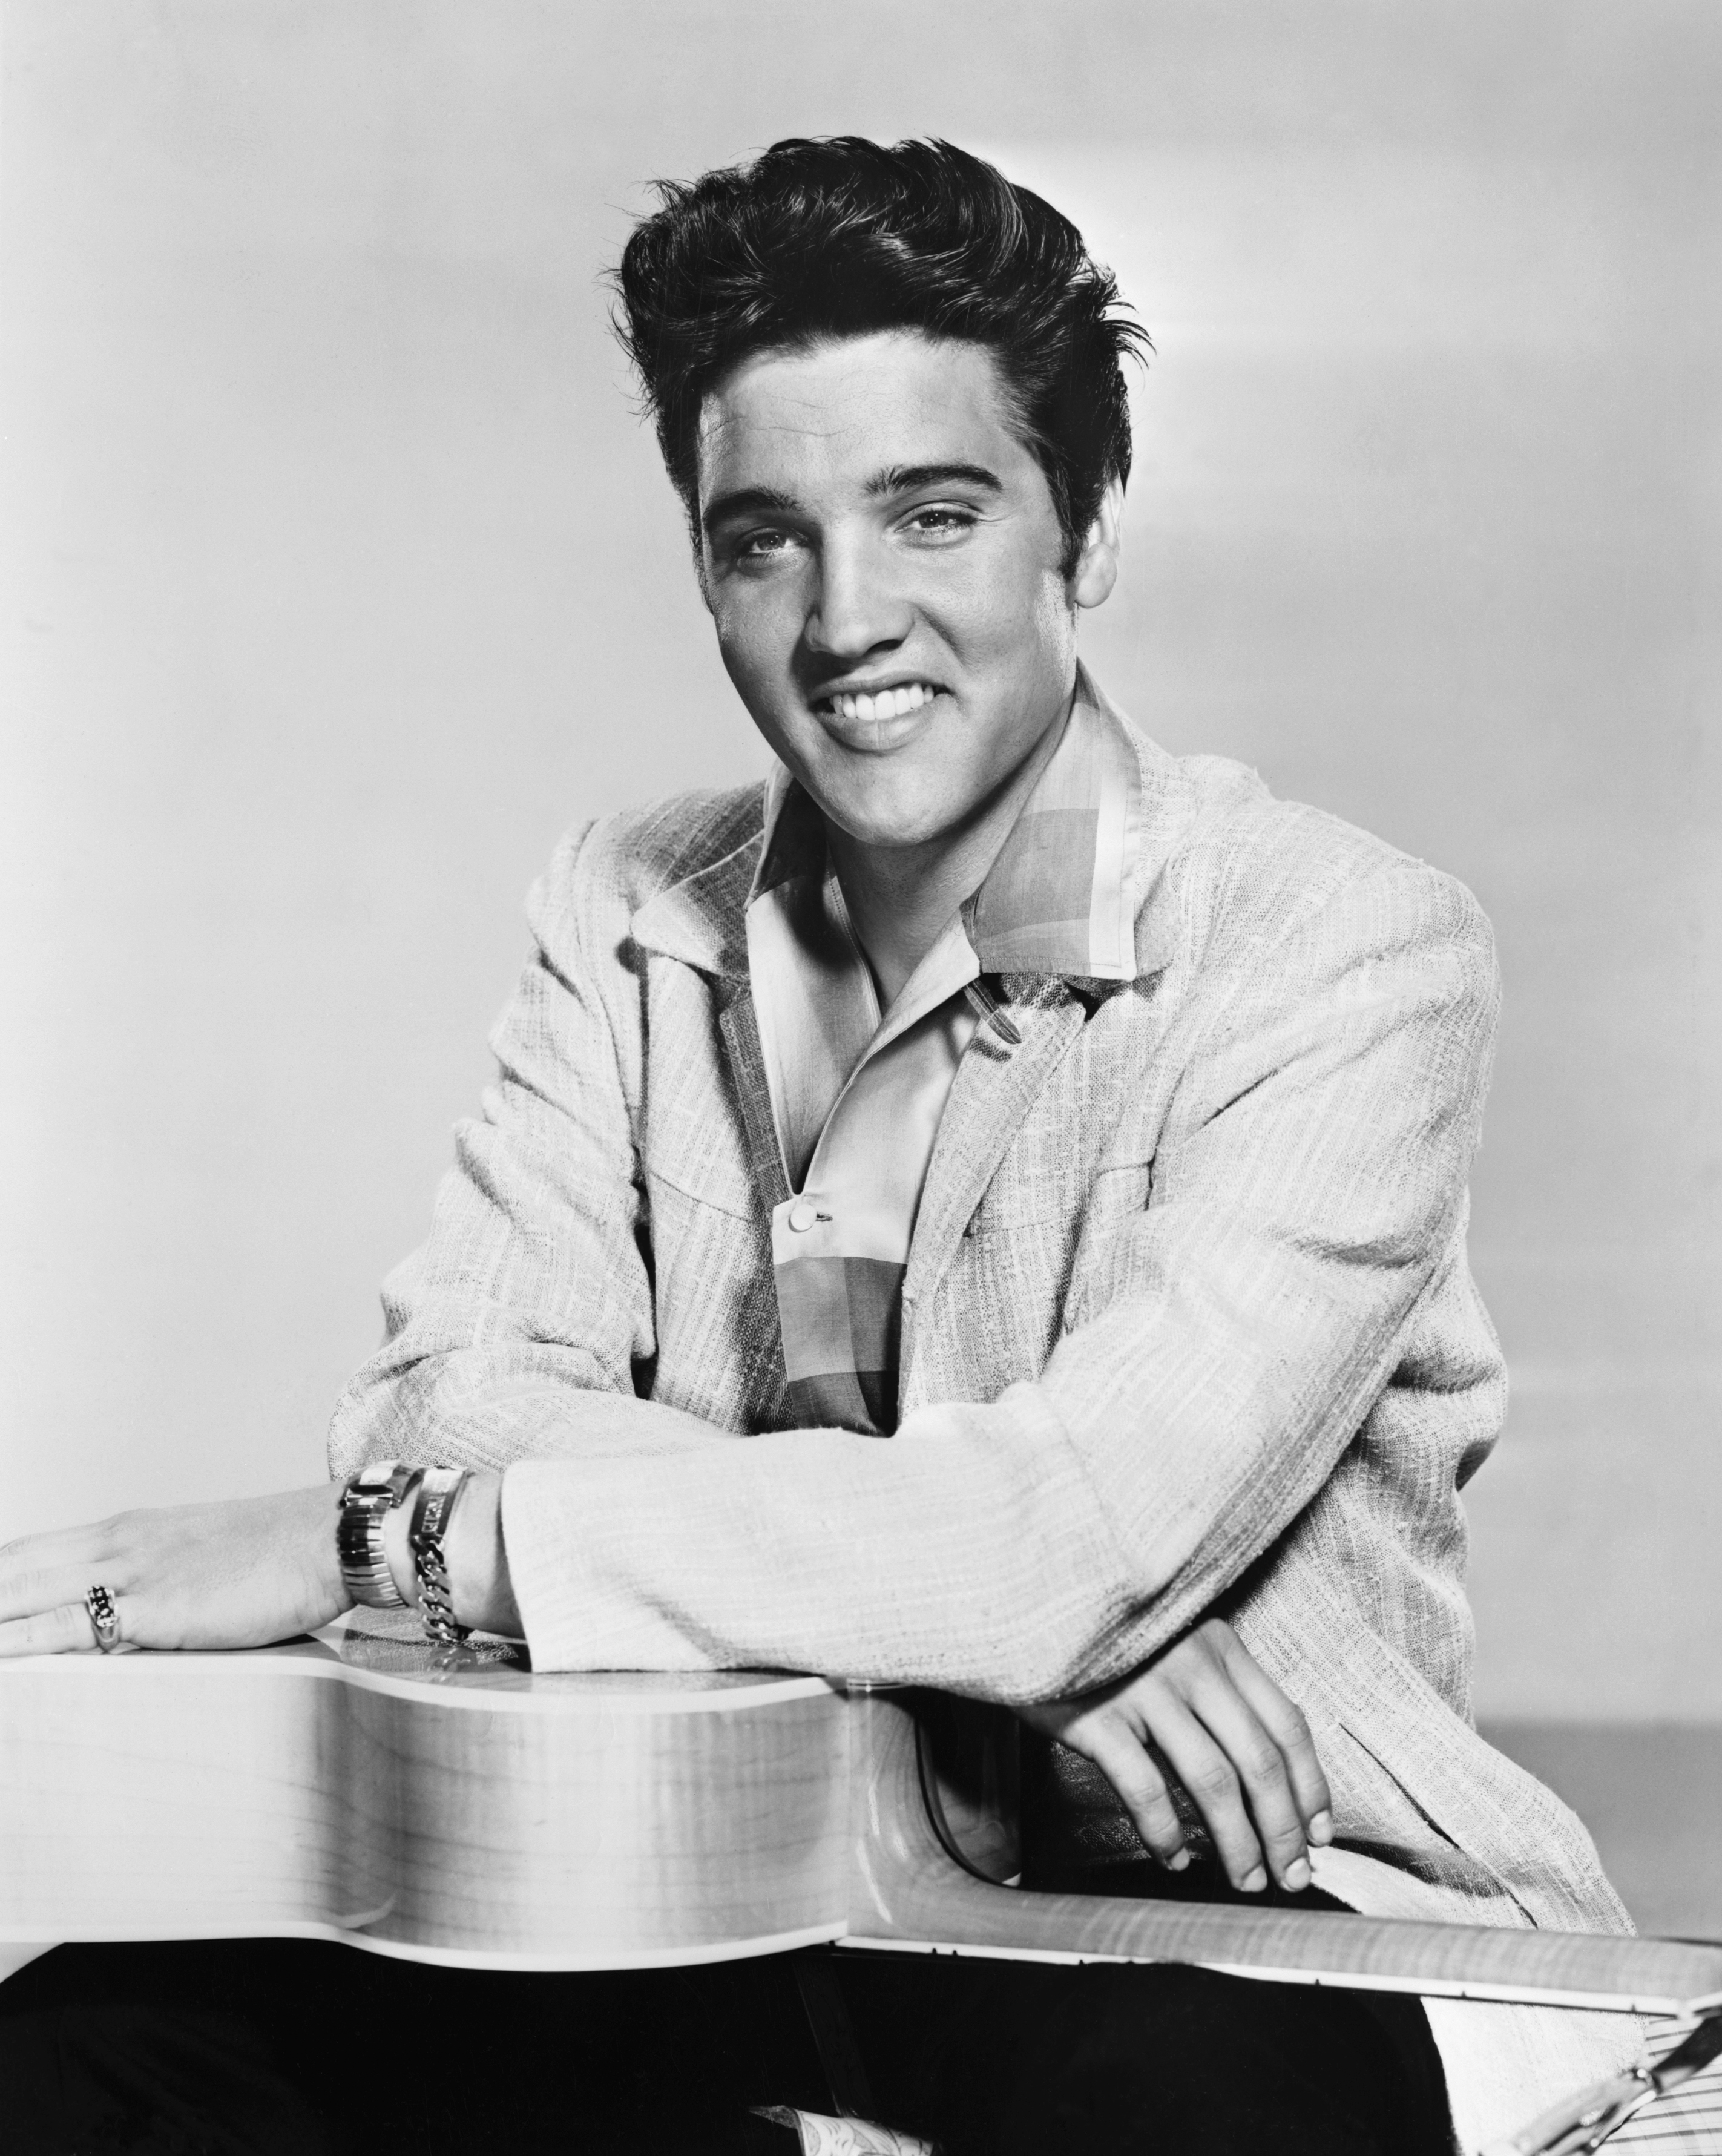 Elvis Presley poses in a promotional portrait for the movie "Jailhouse Rock" on January 1,1957. | Source: Getty Images